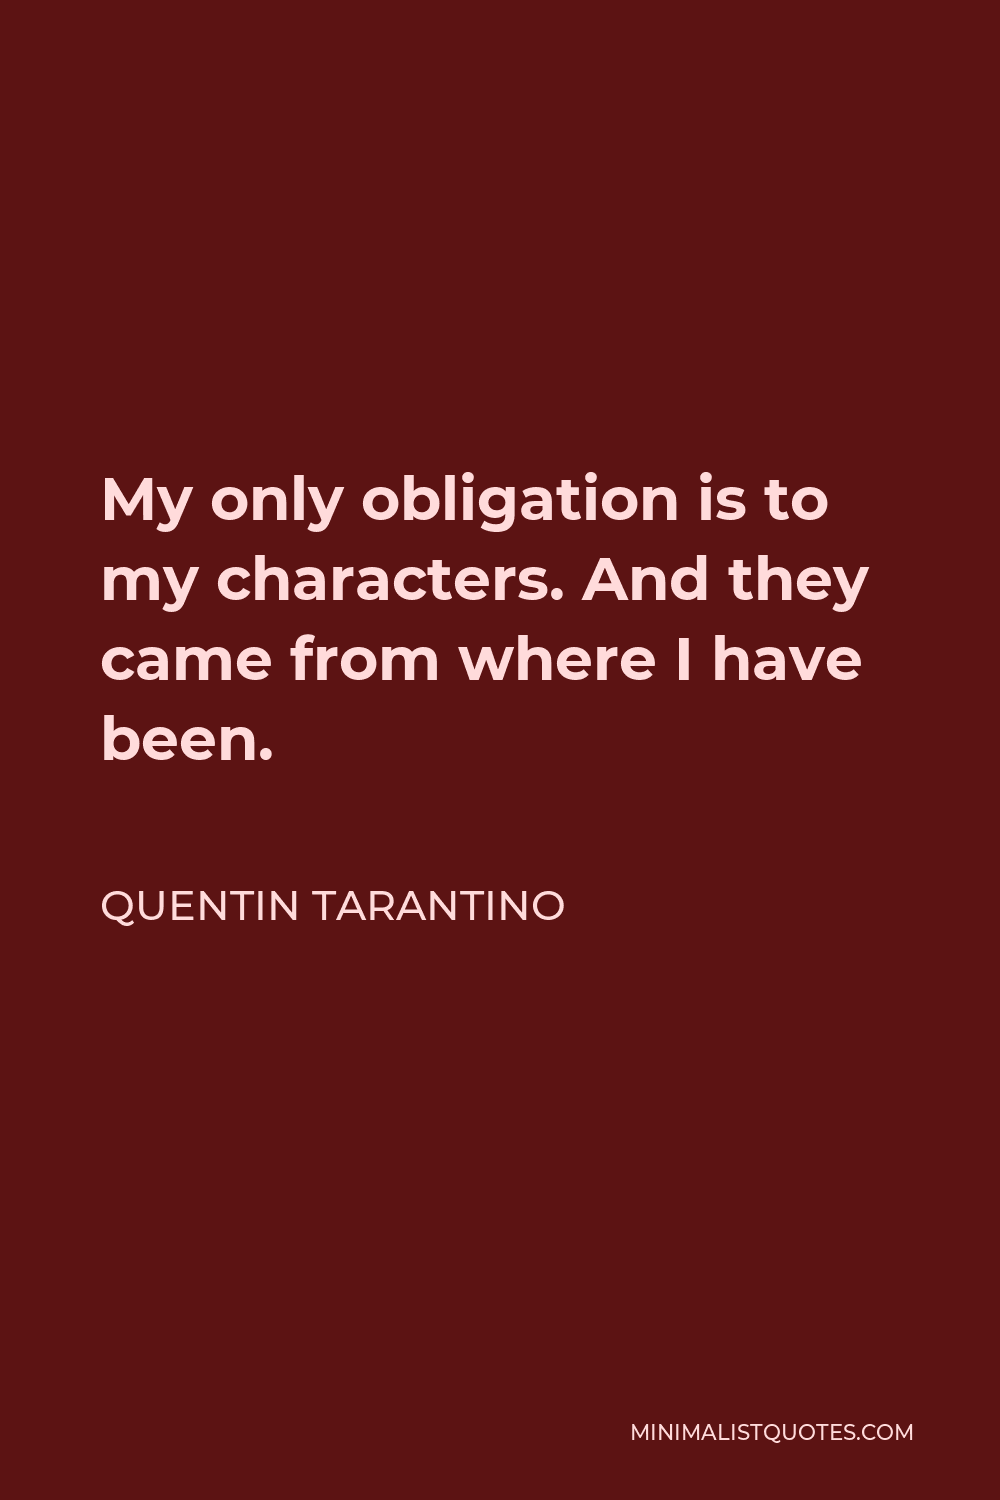 Quentin Tarantino Quote - My only obligation is to my characters. And they came from where I have been.